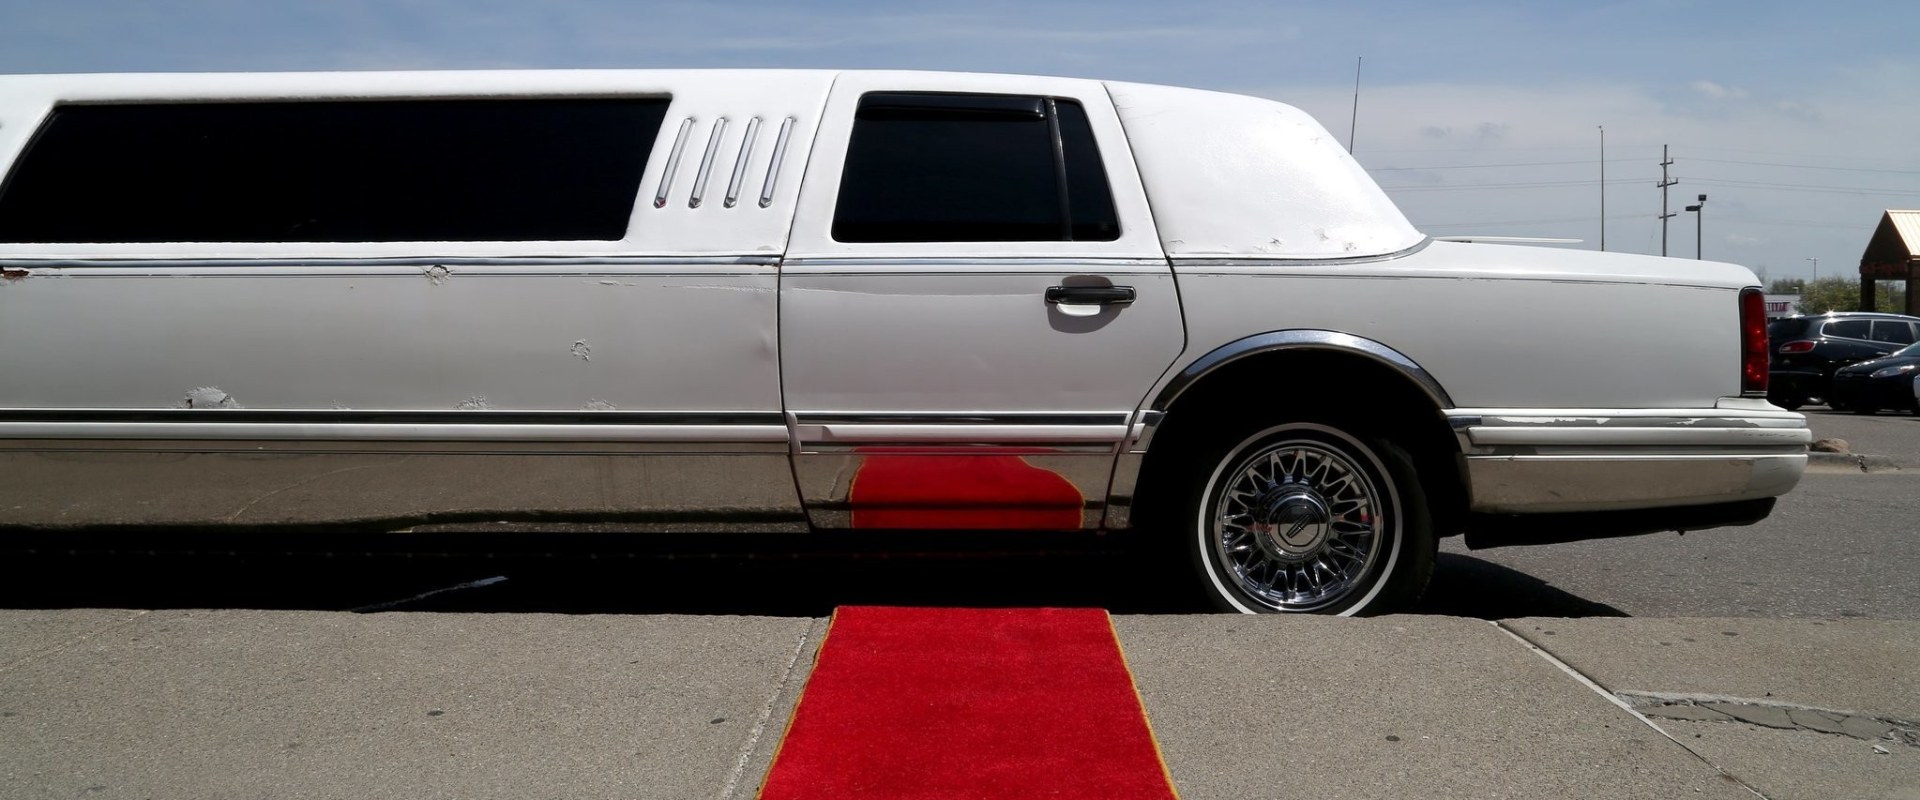 Do You Need a CDL to Drive a Limo in Texas?